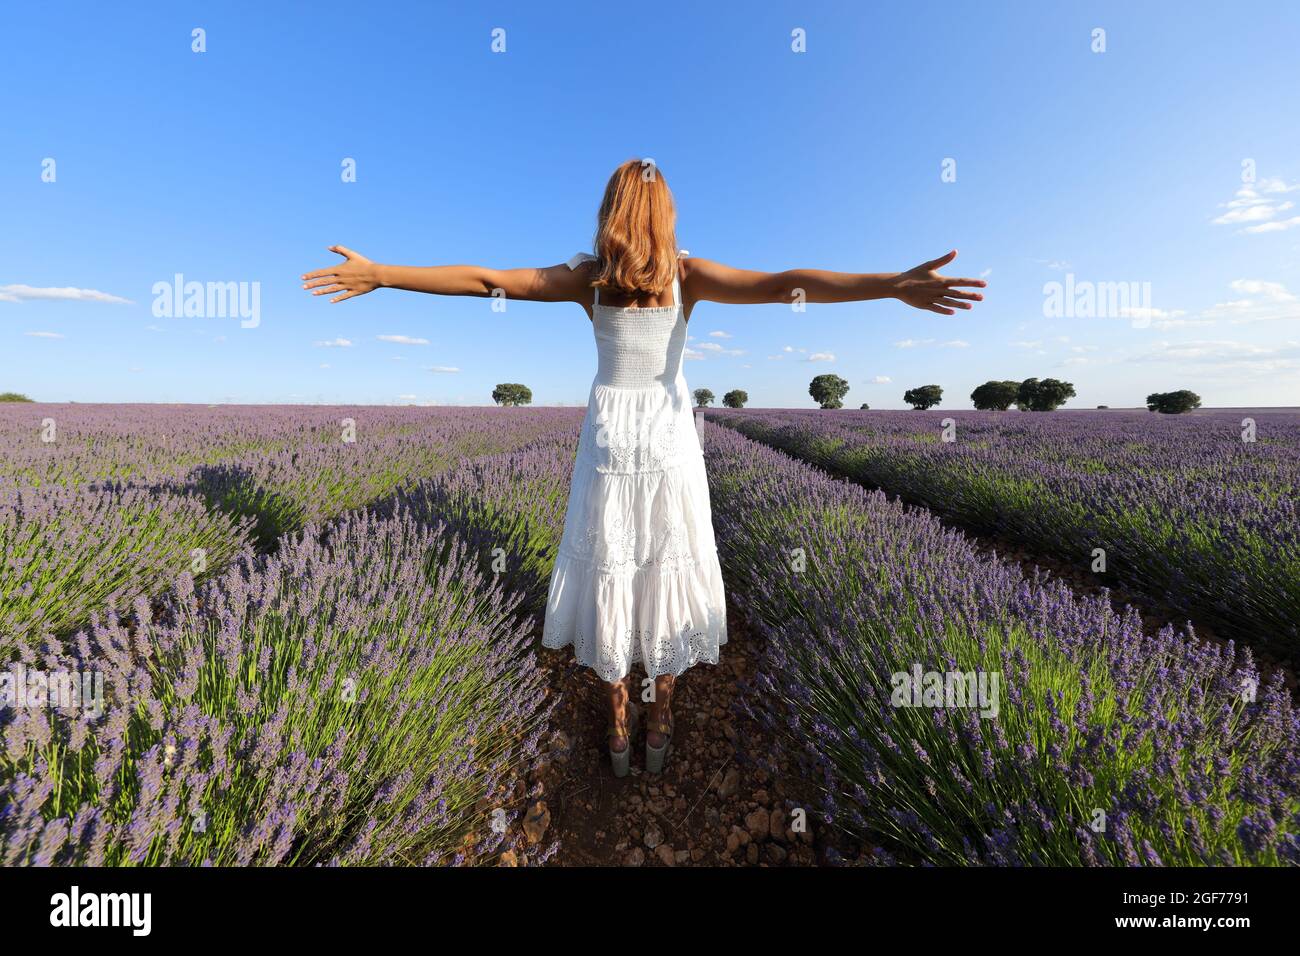 Back view of a woman wearing white dress outstretching arms in a lavender field Stock Photo